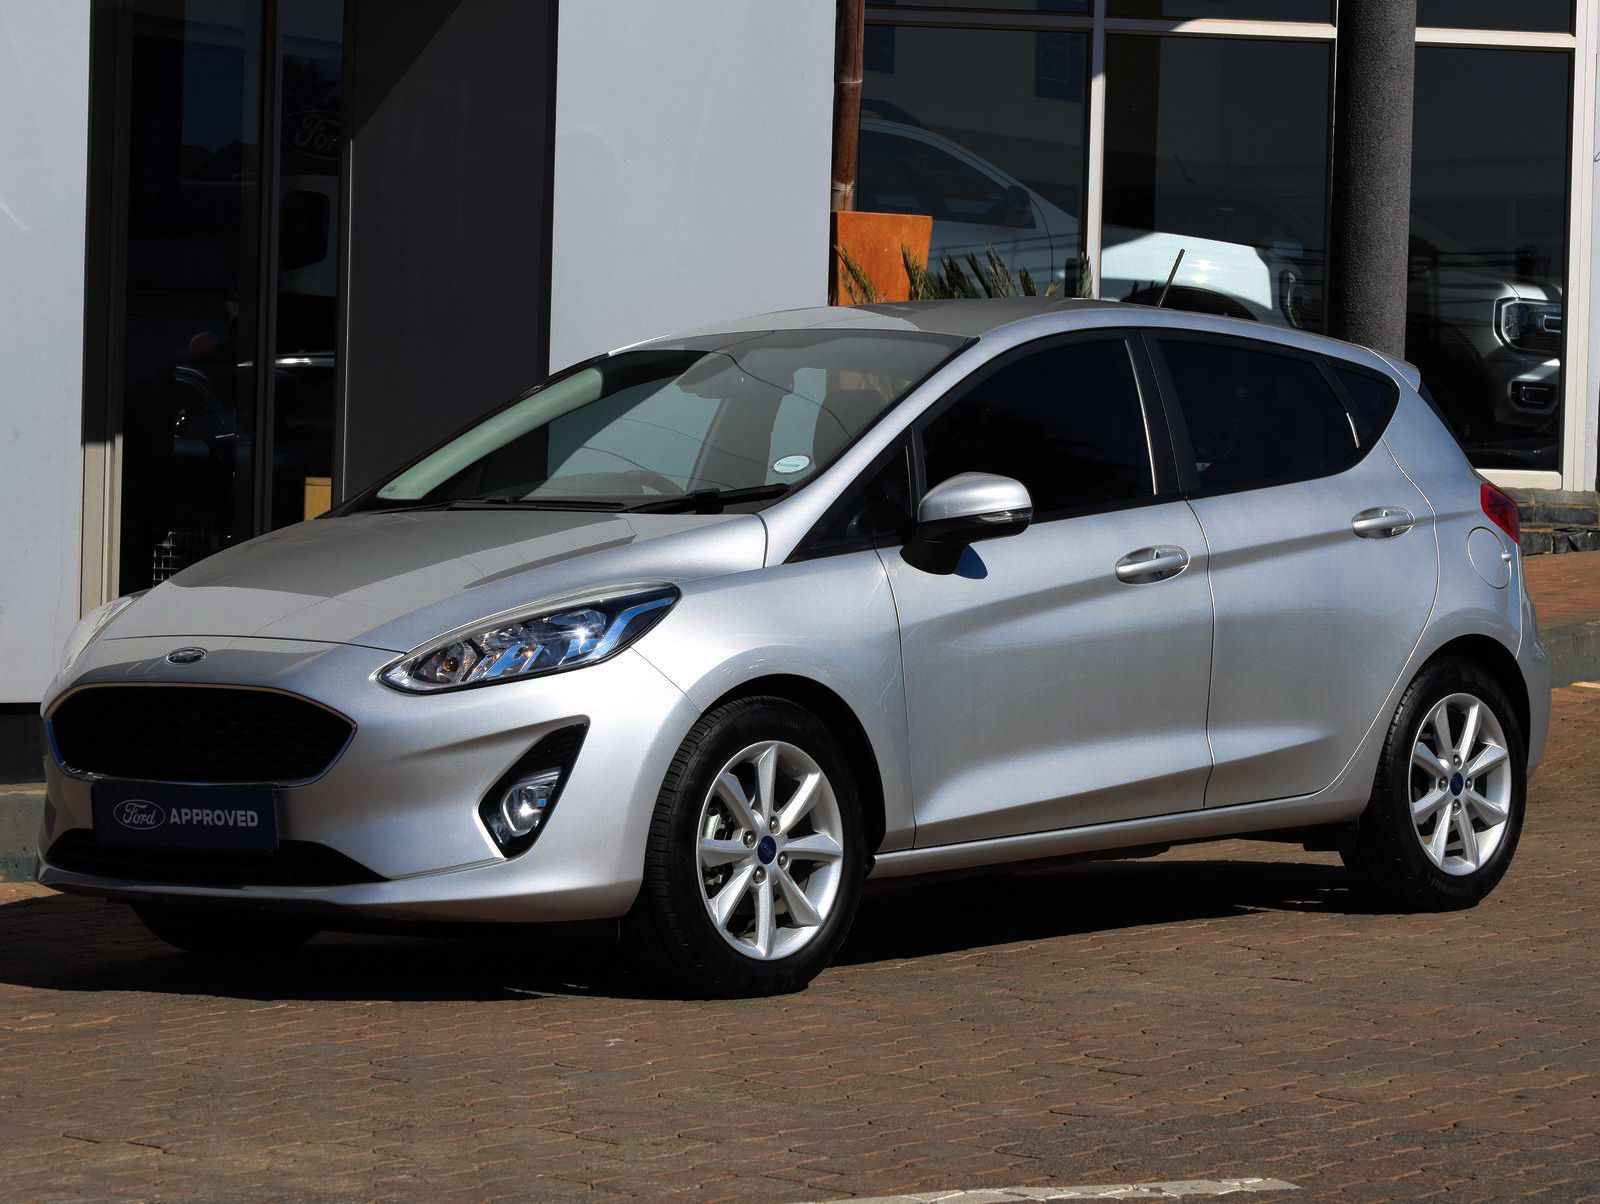 2019 Ford Fiesta  for sale - UF70802